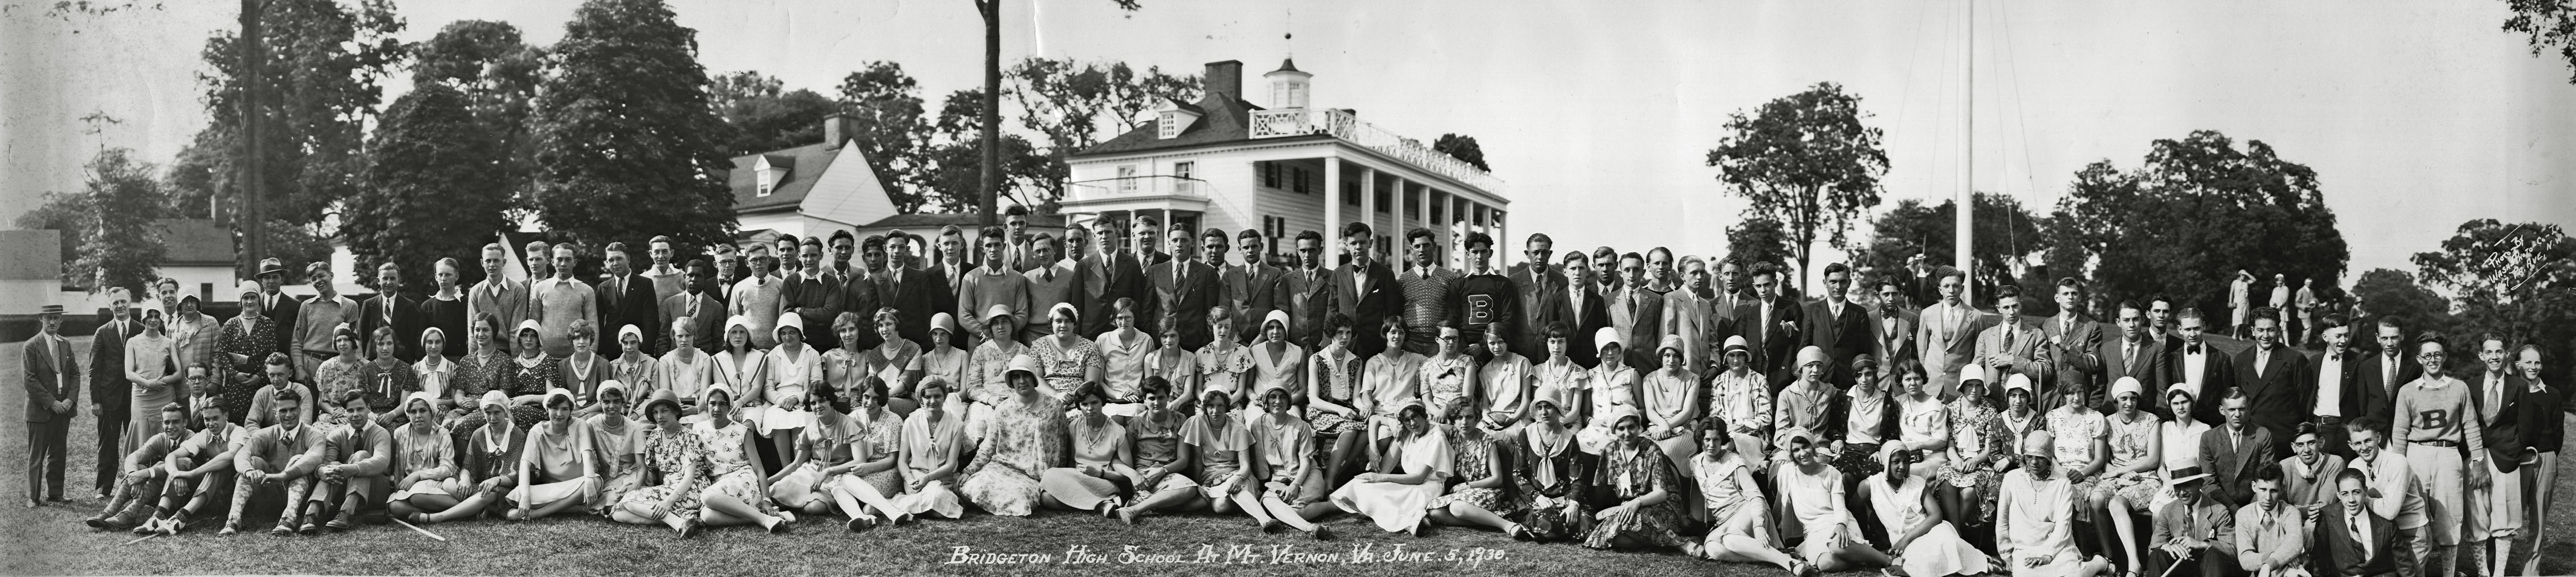 Panoramic photo taken of Bridgeton High School students at Mt. Vernon, Virginia on June 5, 1930.  Original picture was taken with a Cirkut panoramic camera and is approximately 9" x 40" (these pictures were often referred to as "yard-longs"). View full size.